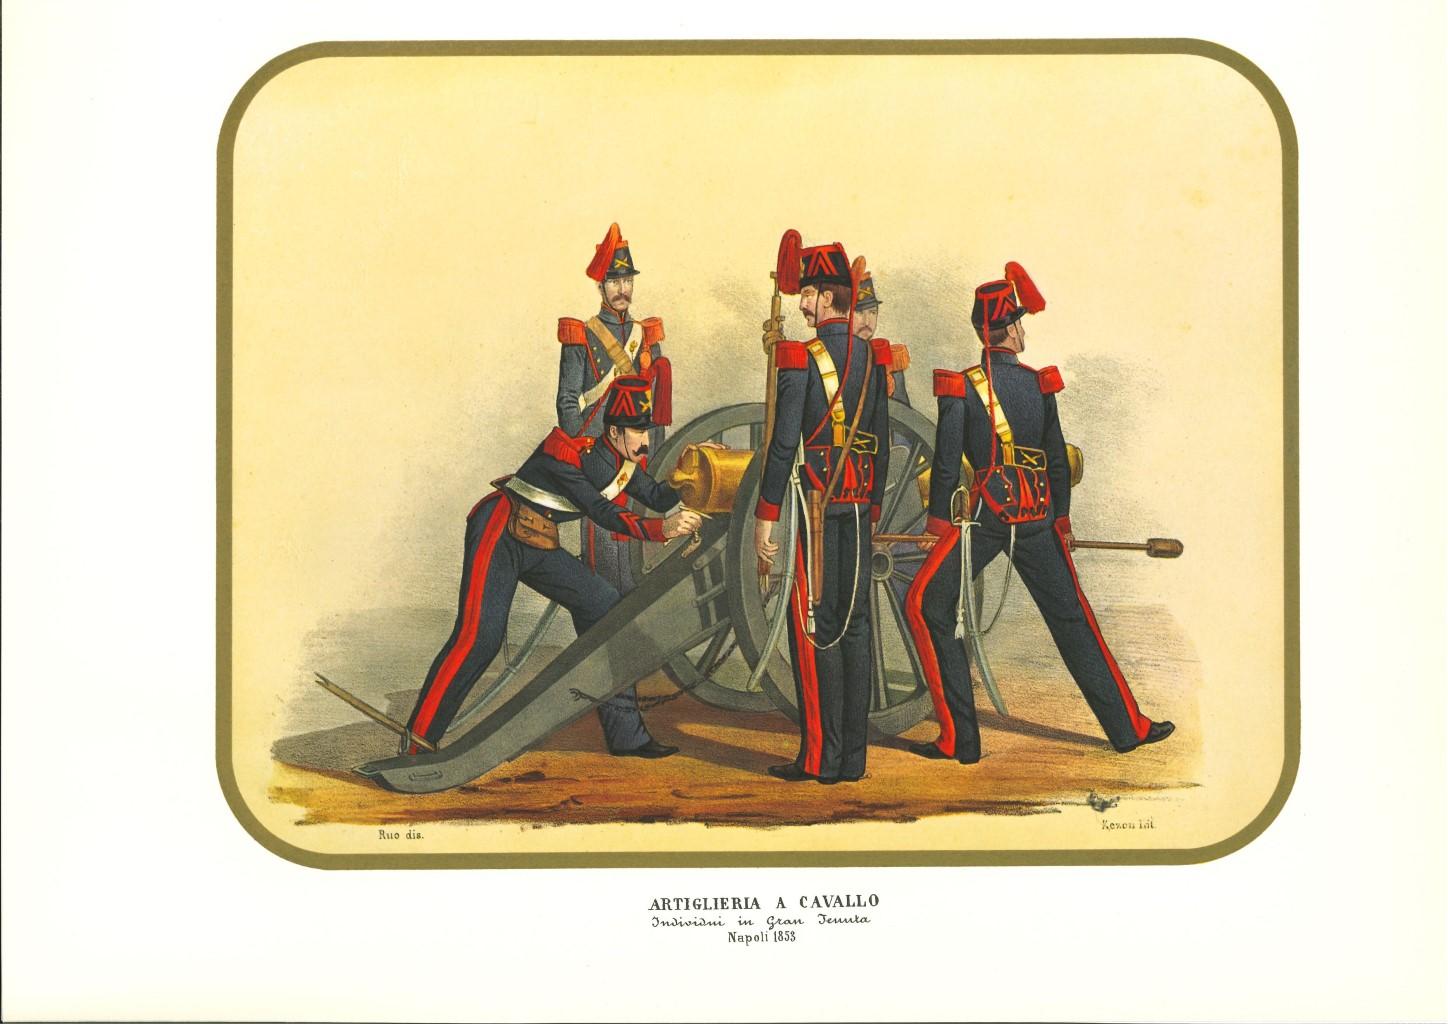 Horse Artillery k is a lithograph by Antonio Zezon. Naples 1853.

Interesting colored lithograph which describes a special corp of the Artillery.

In excellent condition, this print to one of the most famous lithographic collections of the artist: